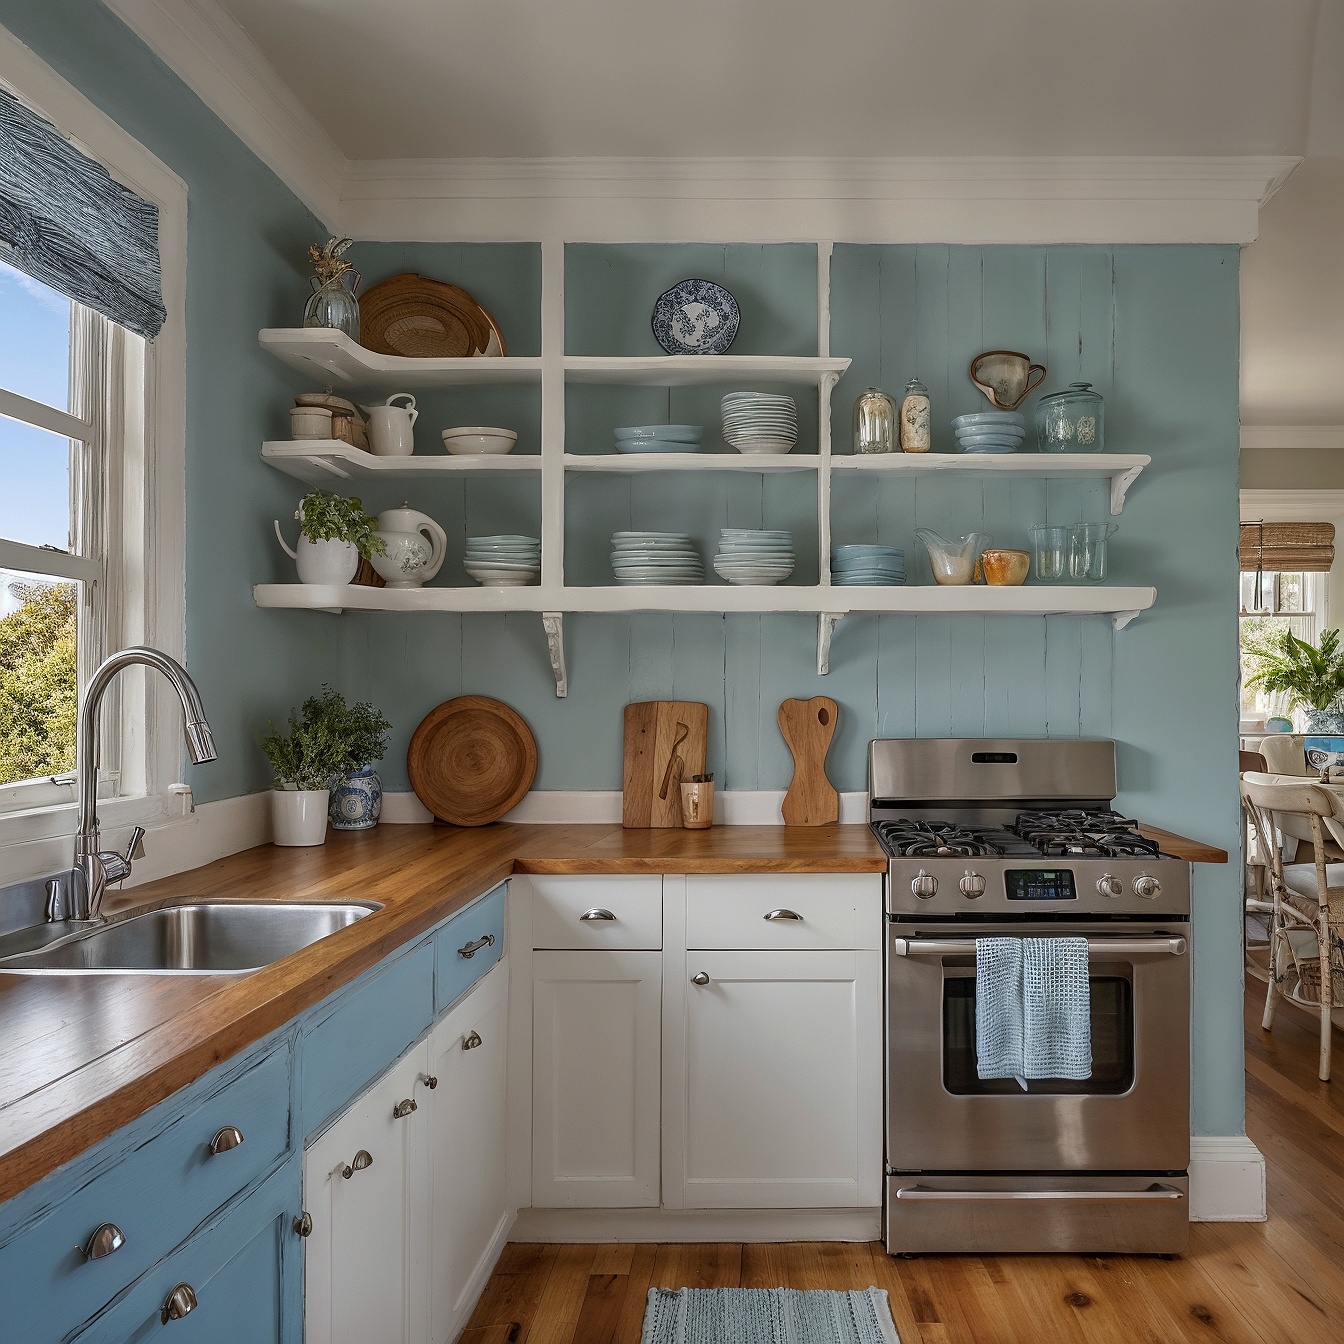 Coastal Kithen Layout With White Cabinetry, Blue Accents And Wooden Countertop